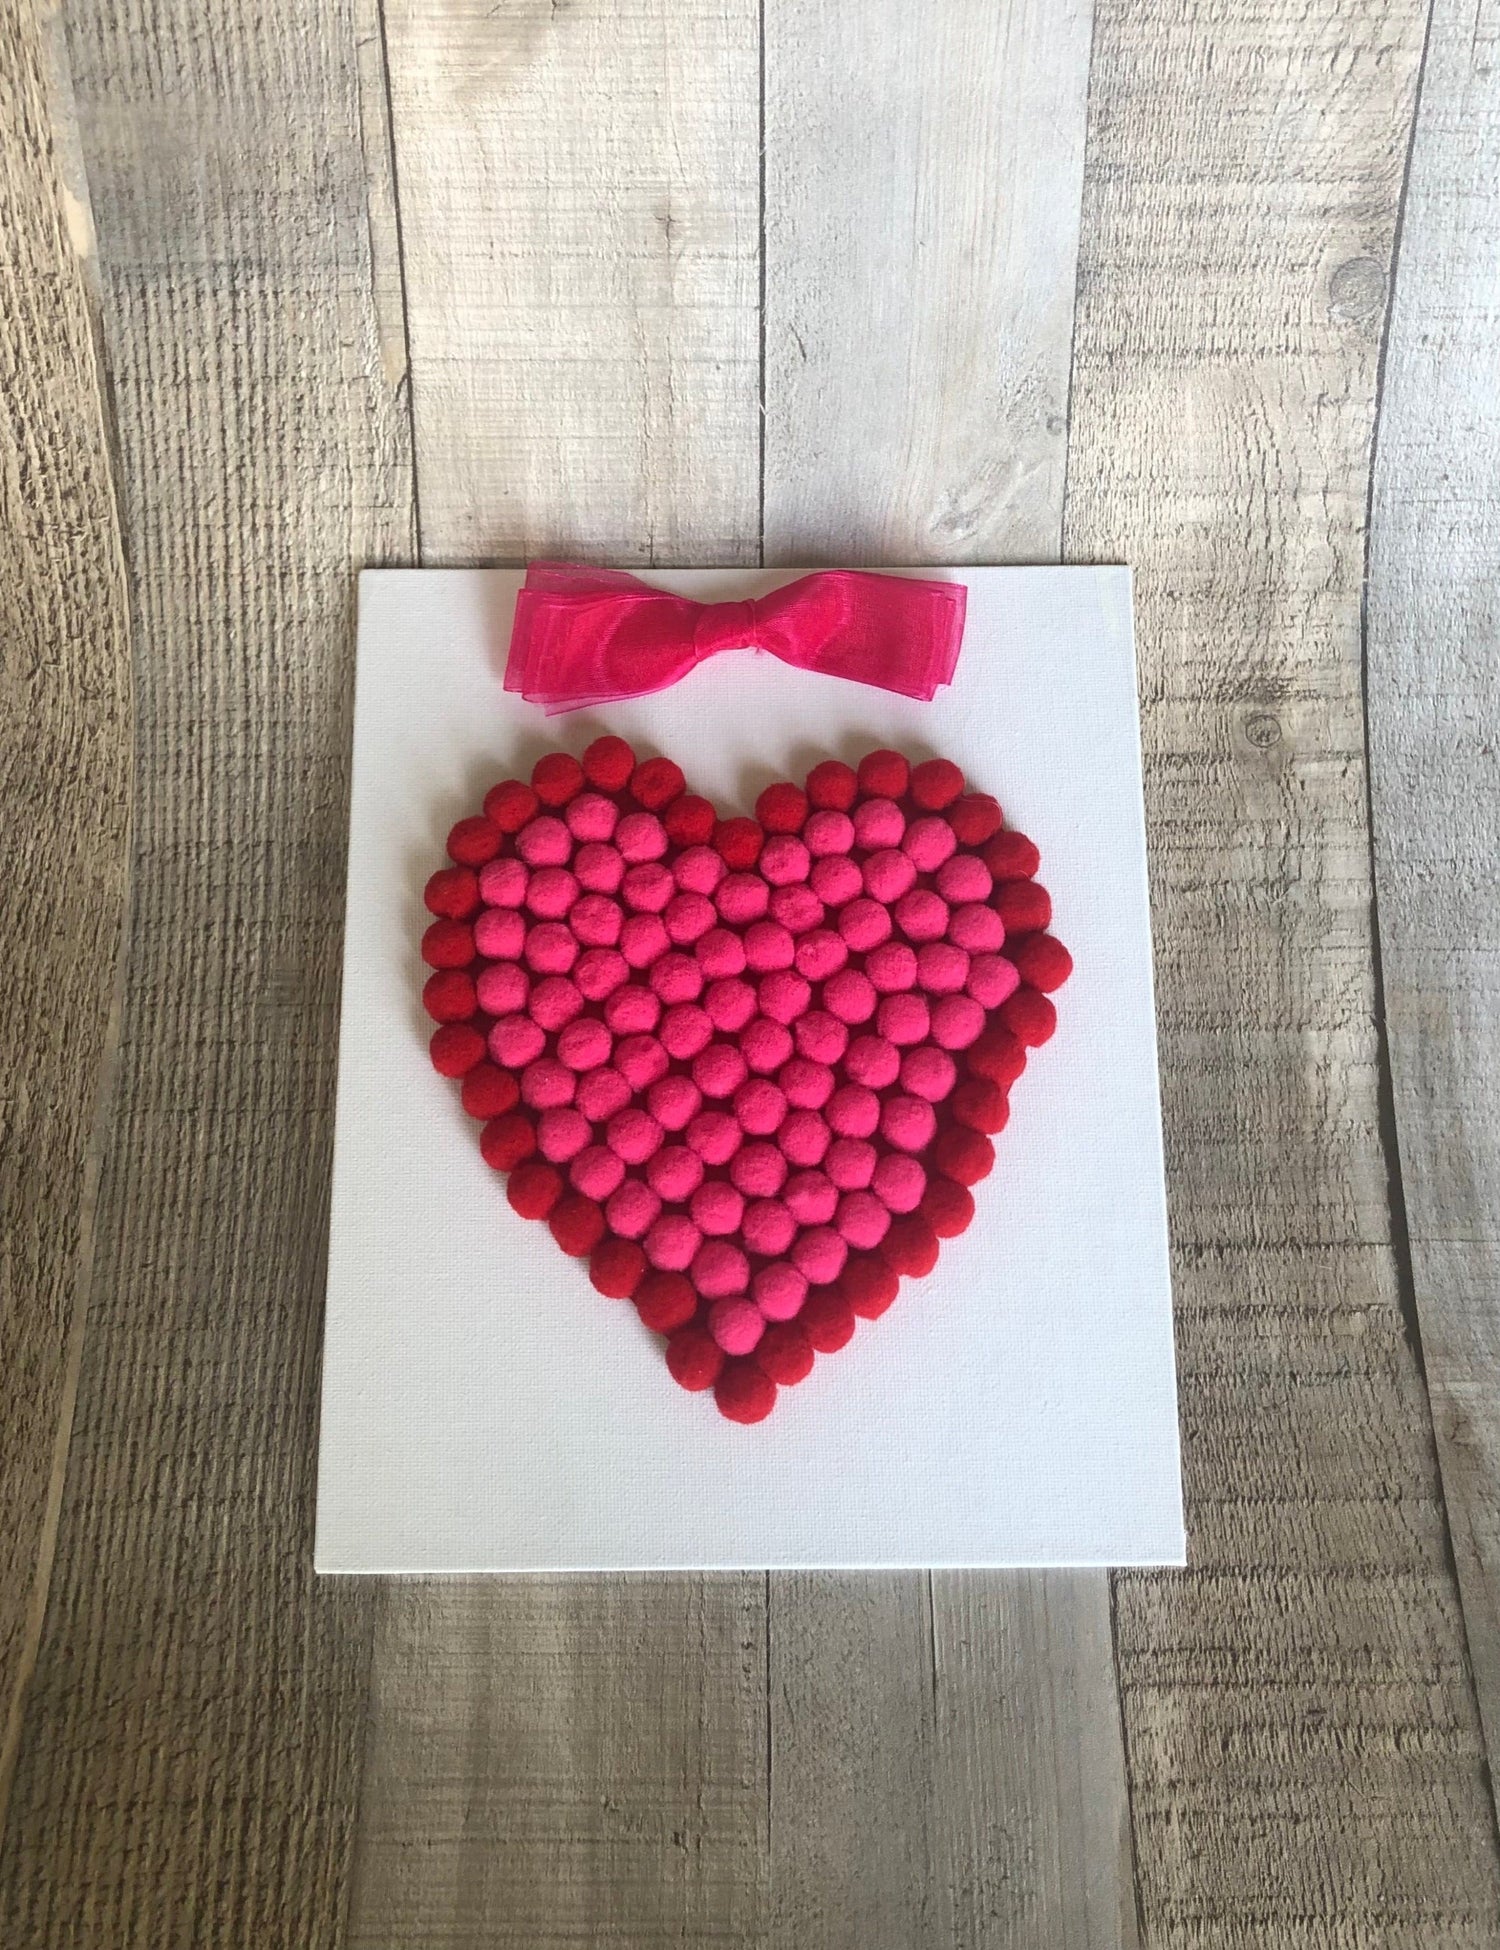 Mini Pom Pom Heart Canvas Kit/ 6 Count or 12 Count – Seniorly Creations